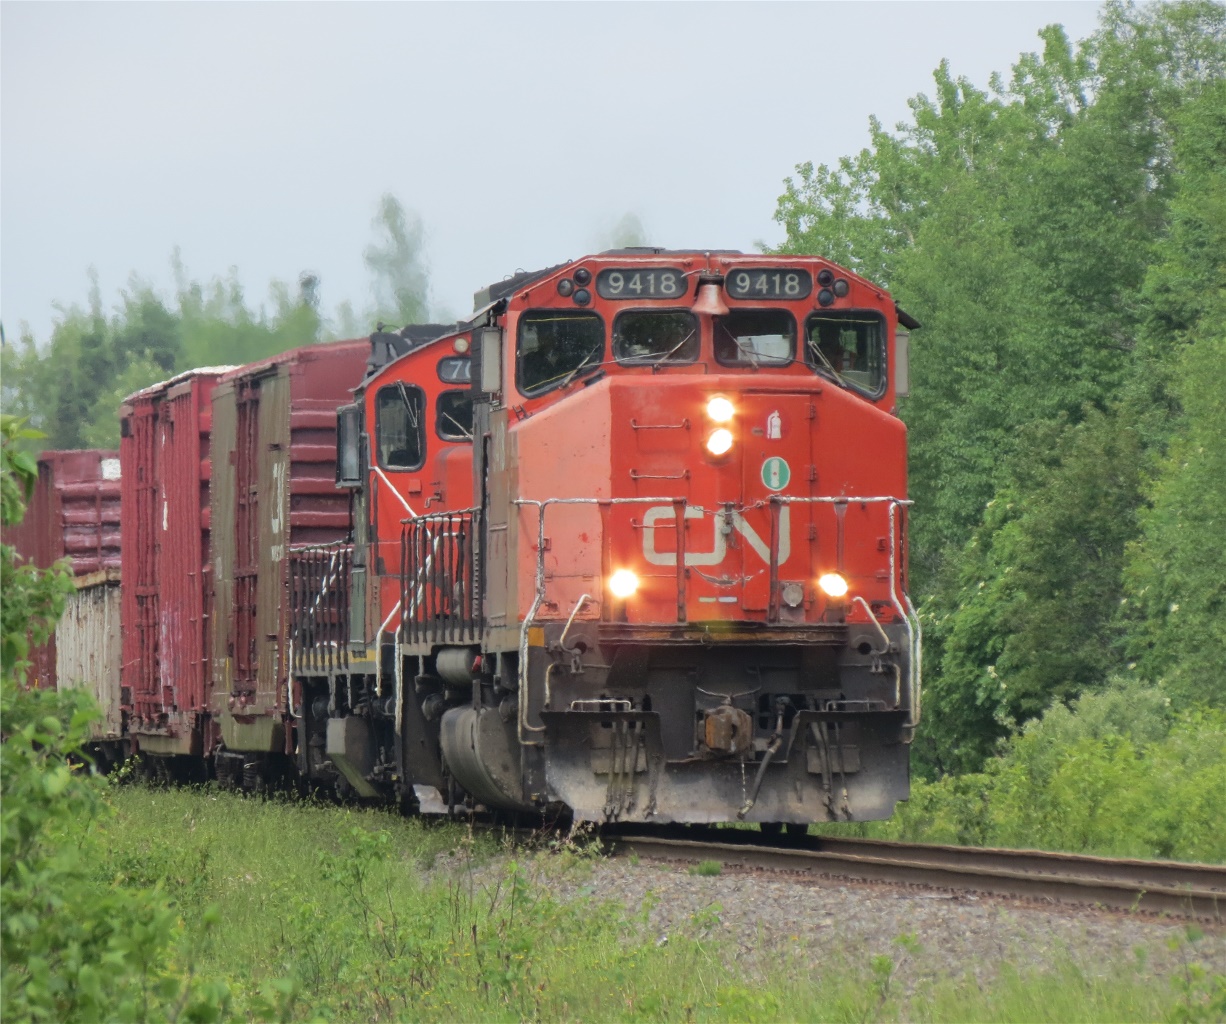 The daily local from Campbellton NB to Bathurst passes the VIA depot at Jacquet River.  CN 9418 and CN 7015 climb out of the river basin and will work up the tracks at Belledune (CHALEUR LUMBER).